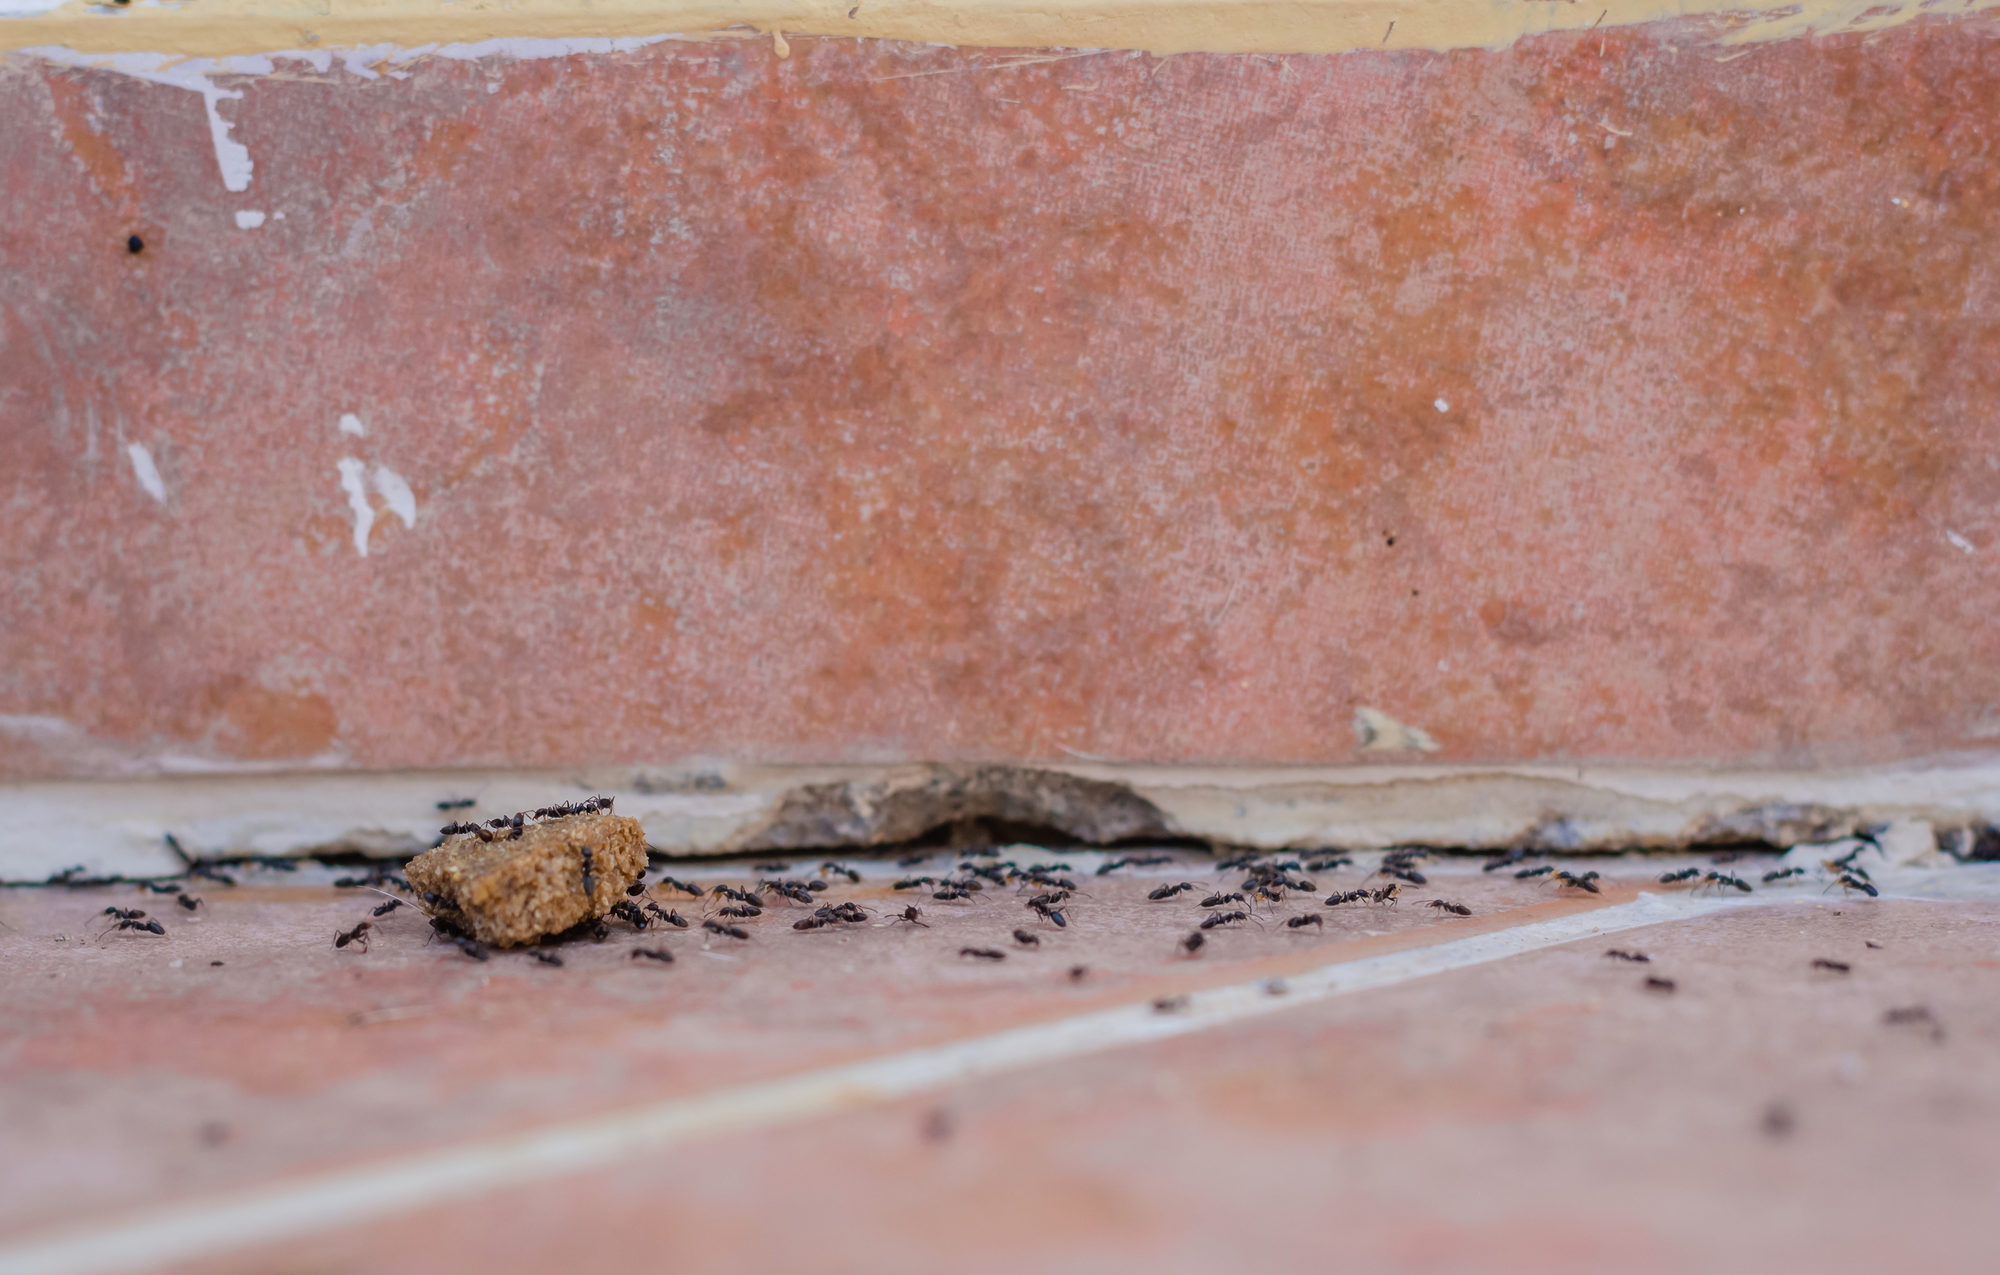 Closeup of of many ants carry a piece of food; on tline floor and into crack between floor and tile baseboard